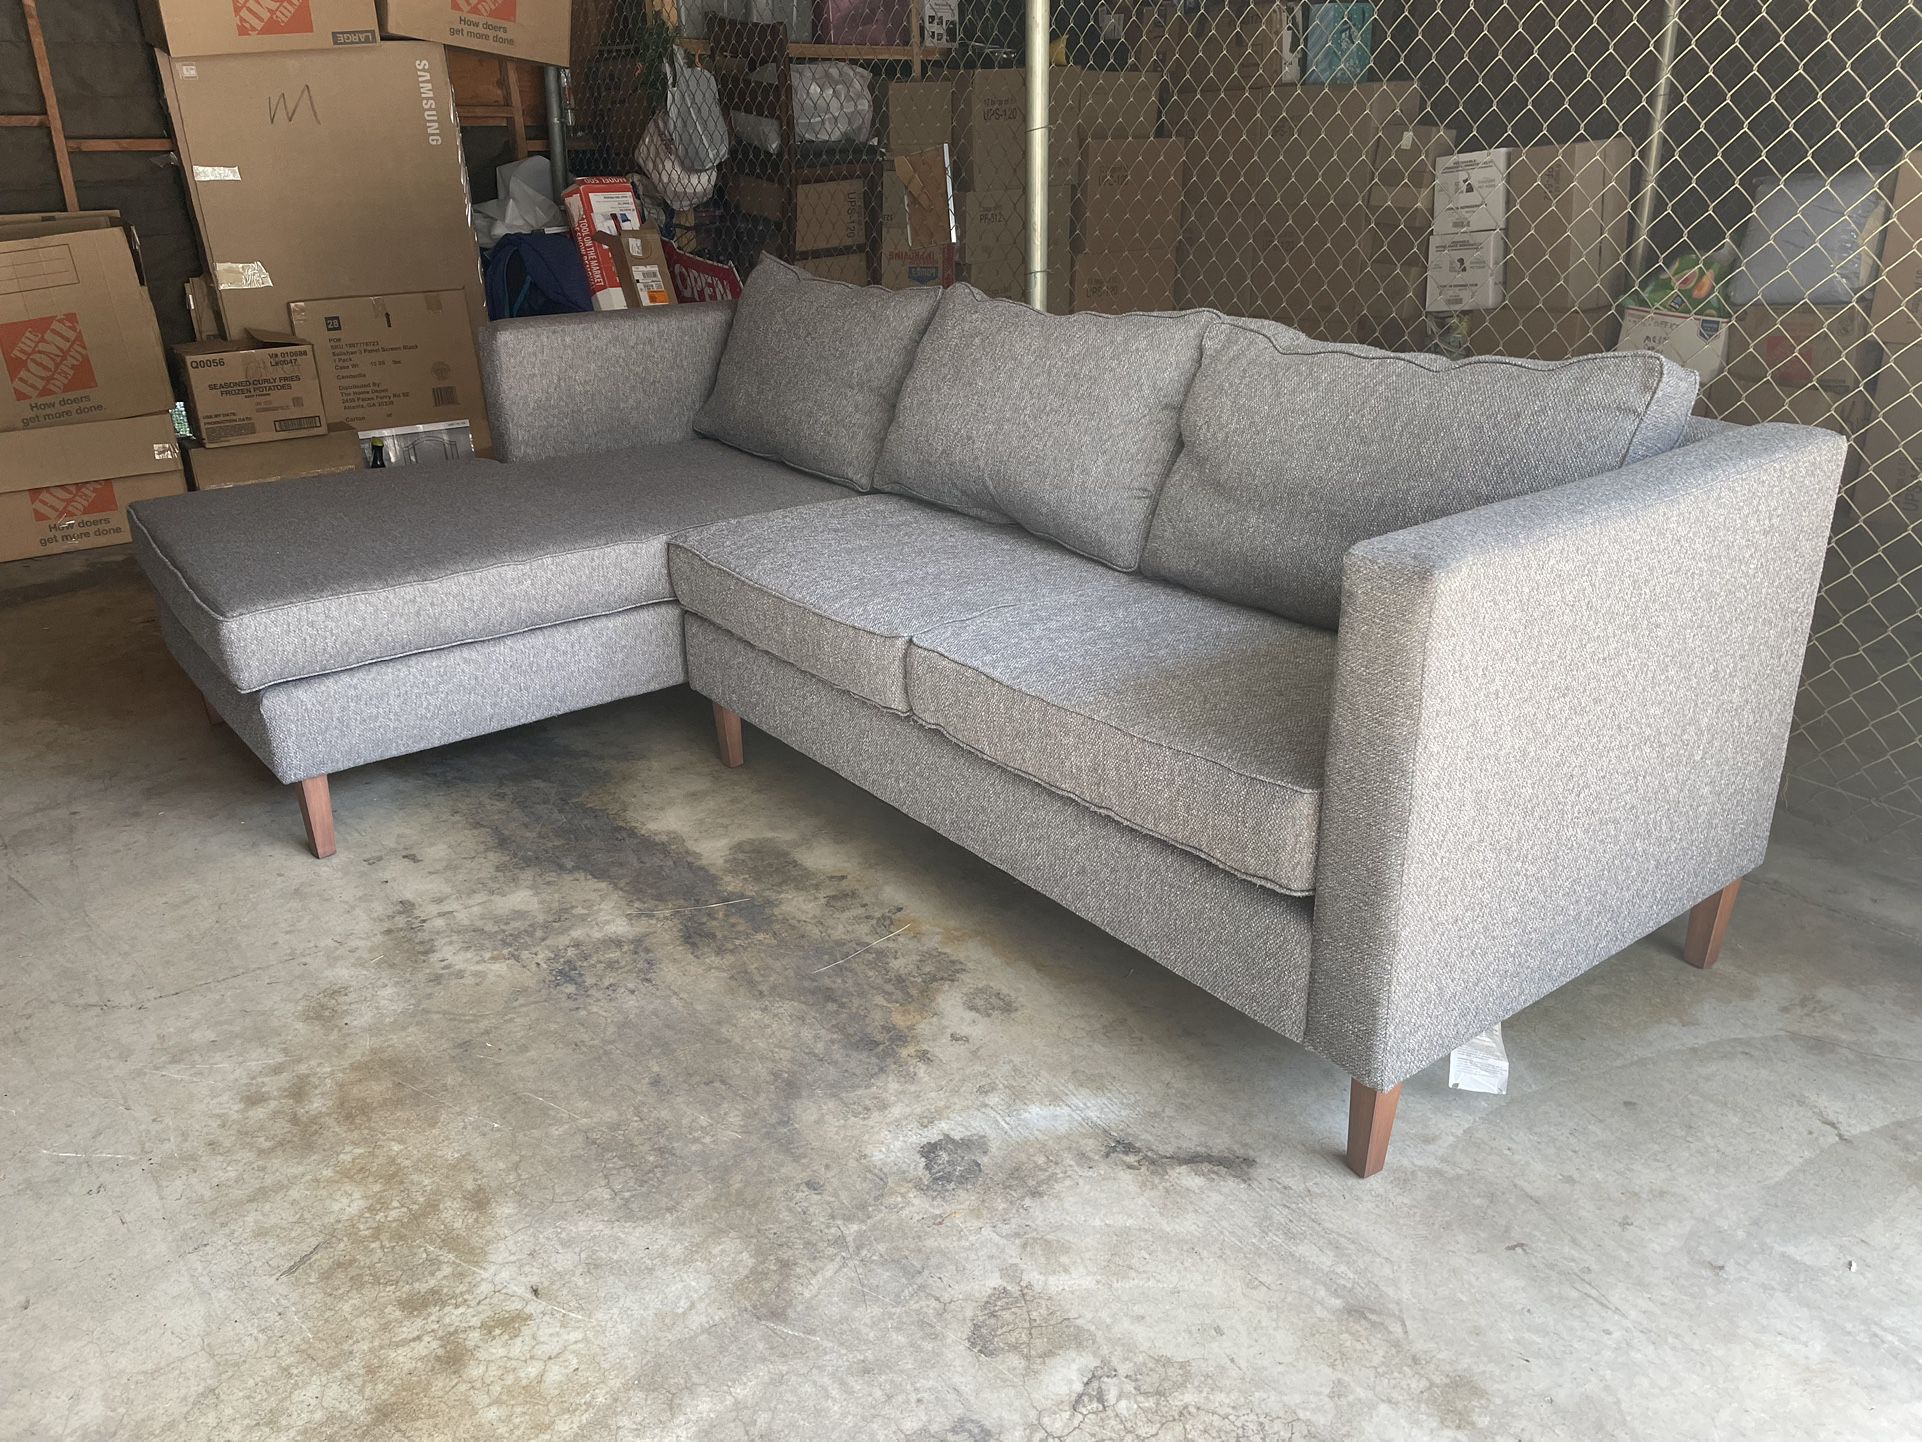 LIKE NEW GREY SECTIONAL 2pc NEED SOLD TODAY